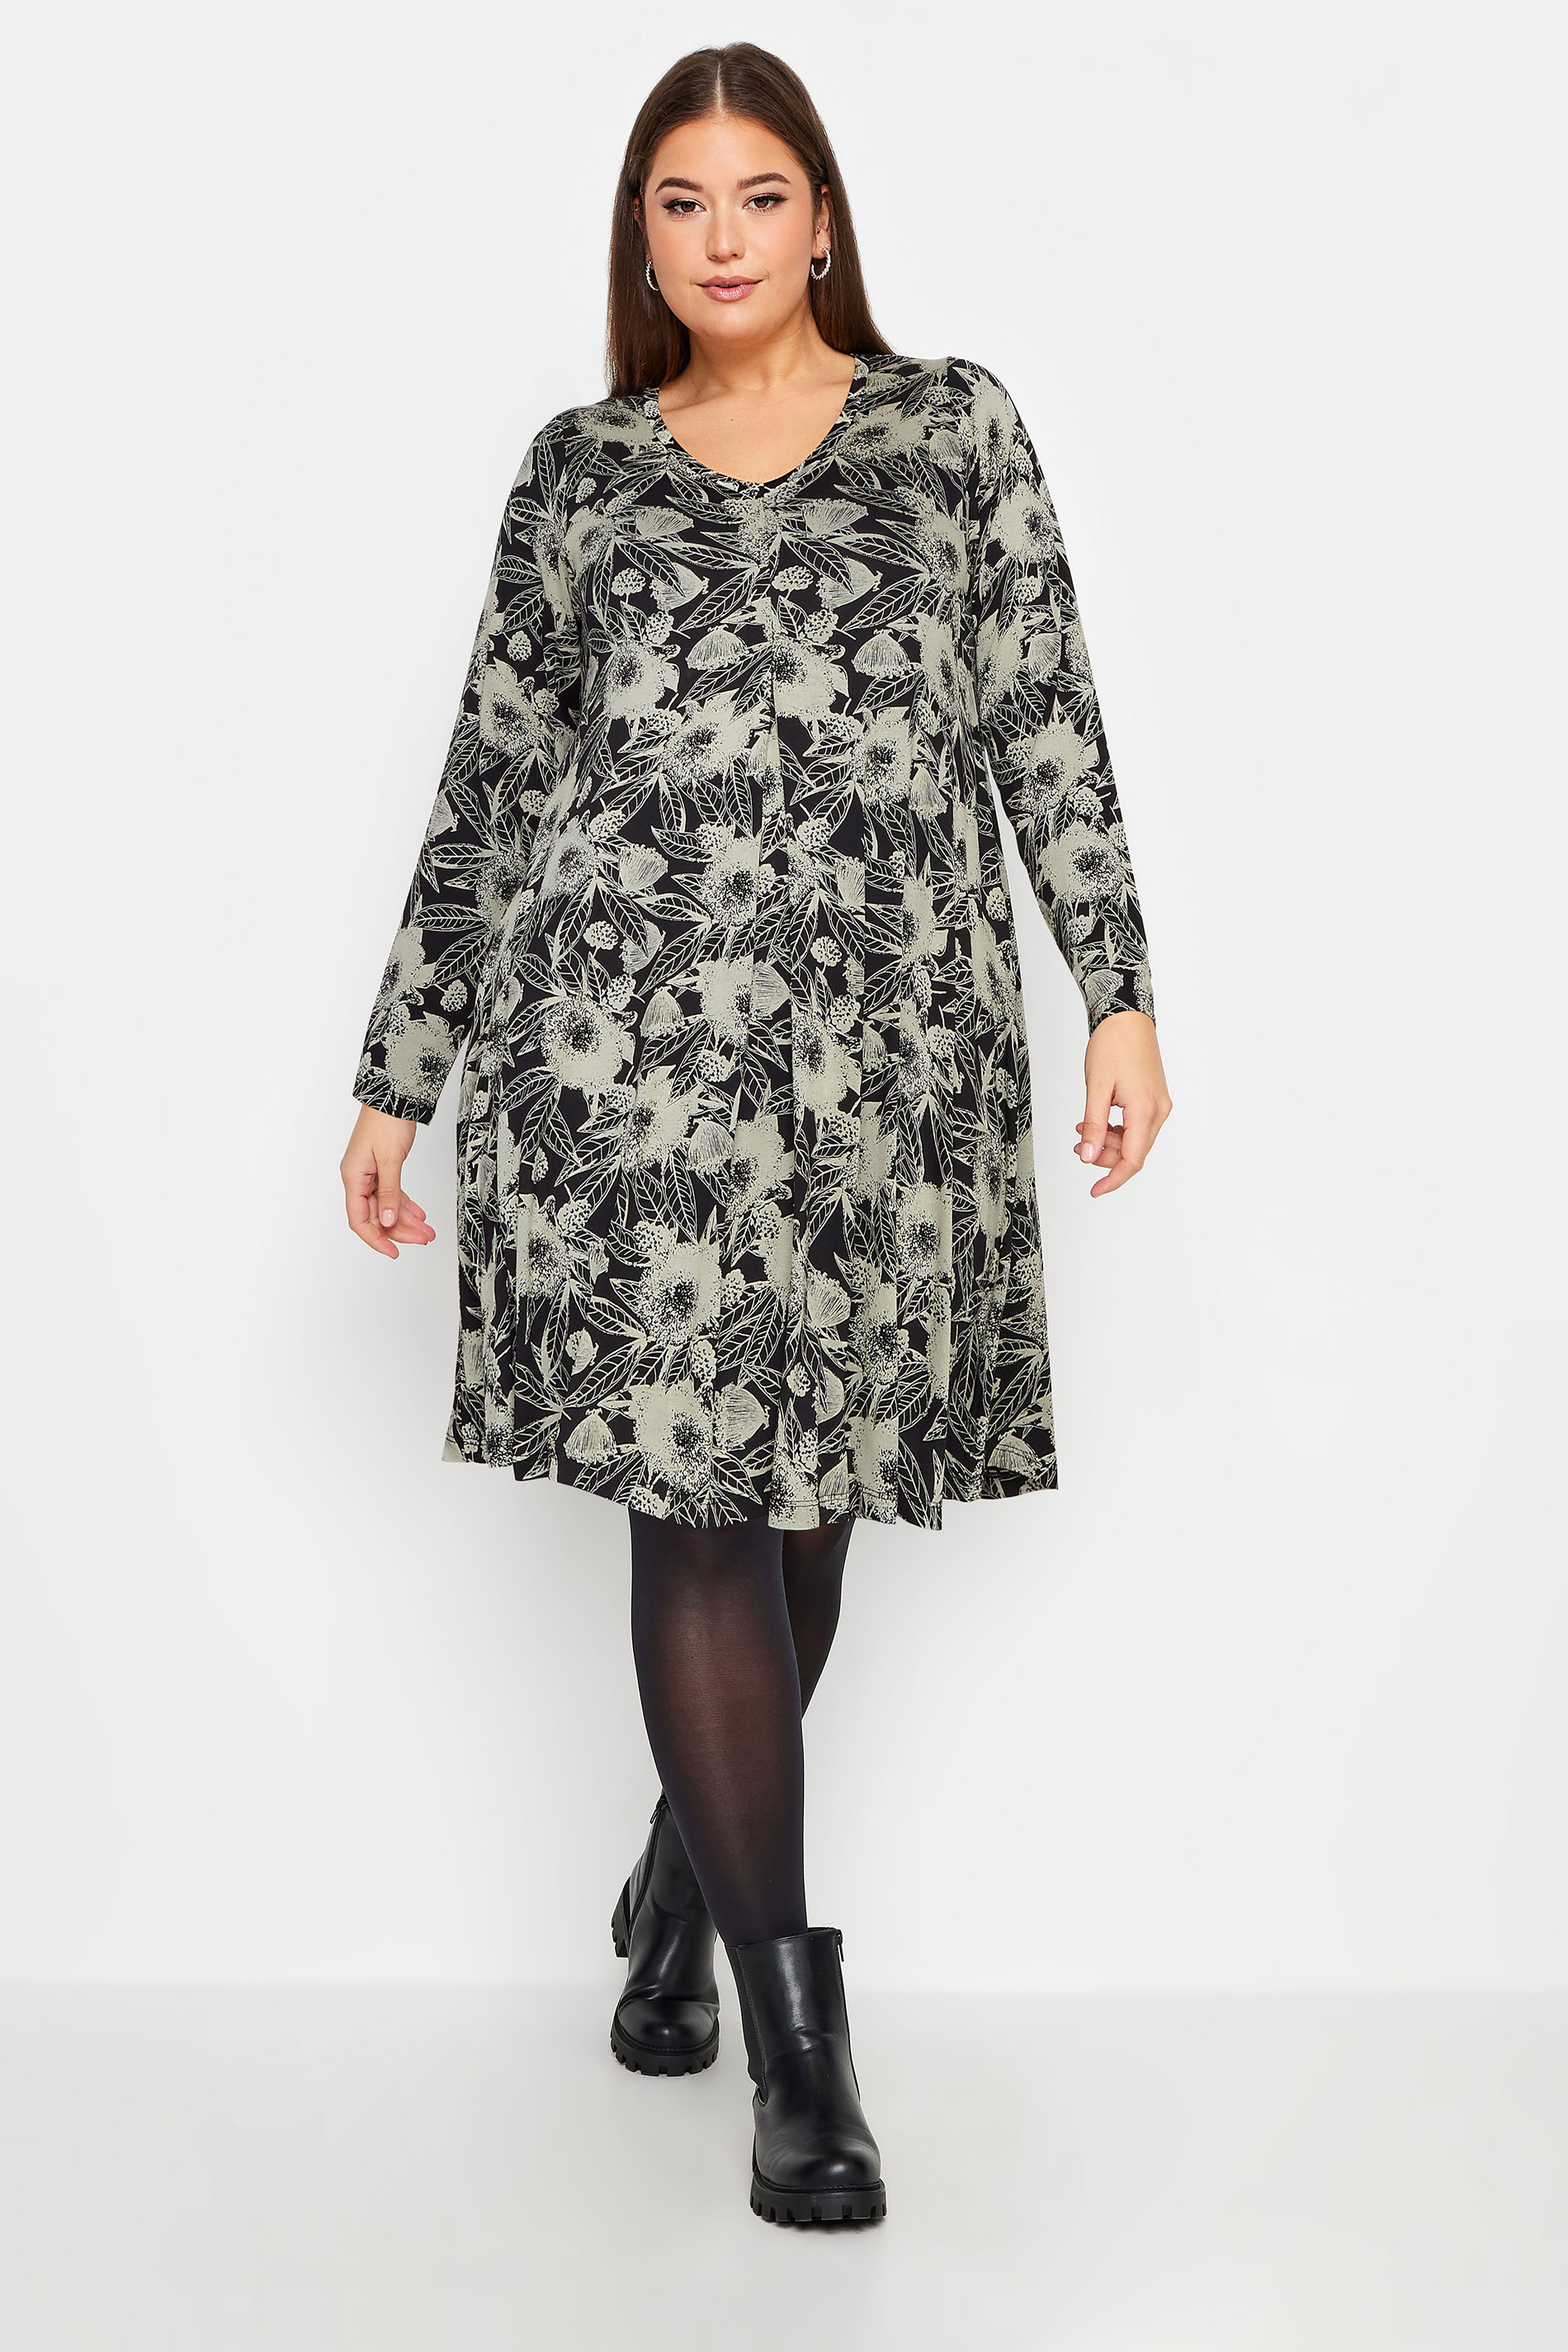 YOURS Plus Size Black Floral Print Swing Dress | Yours Clothing